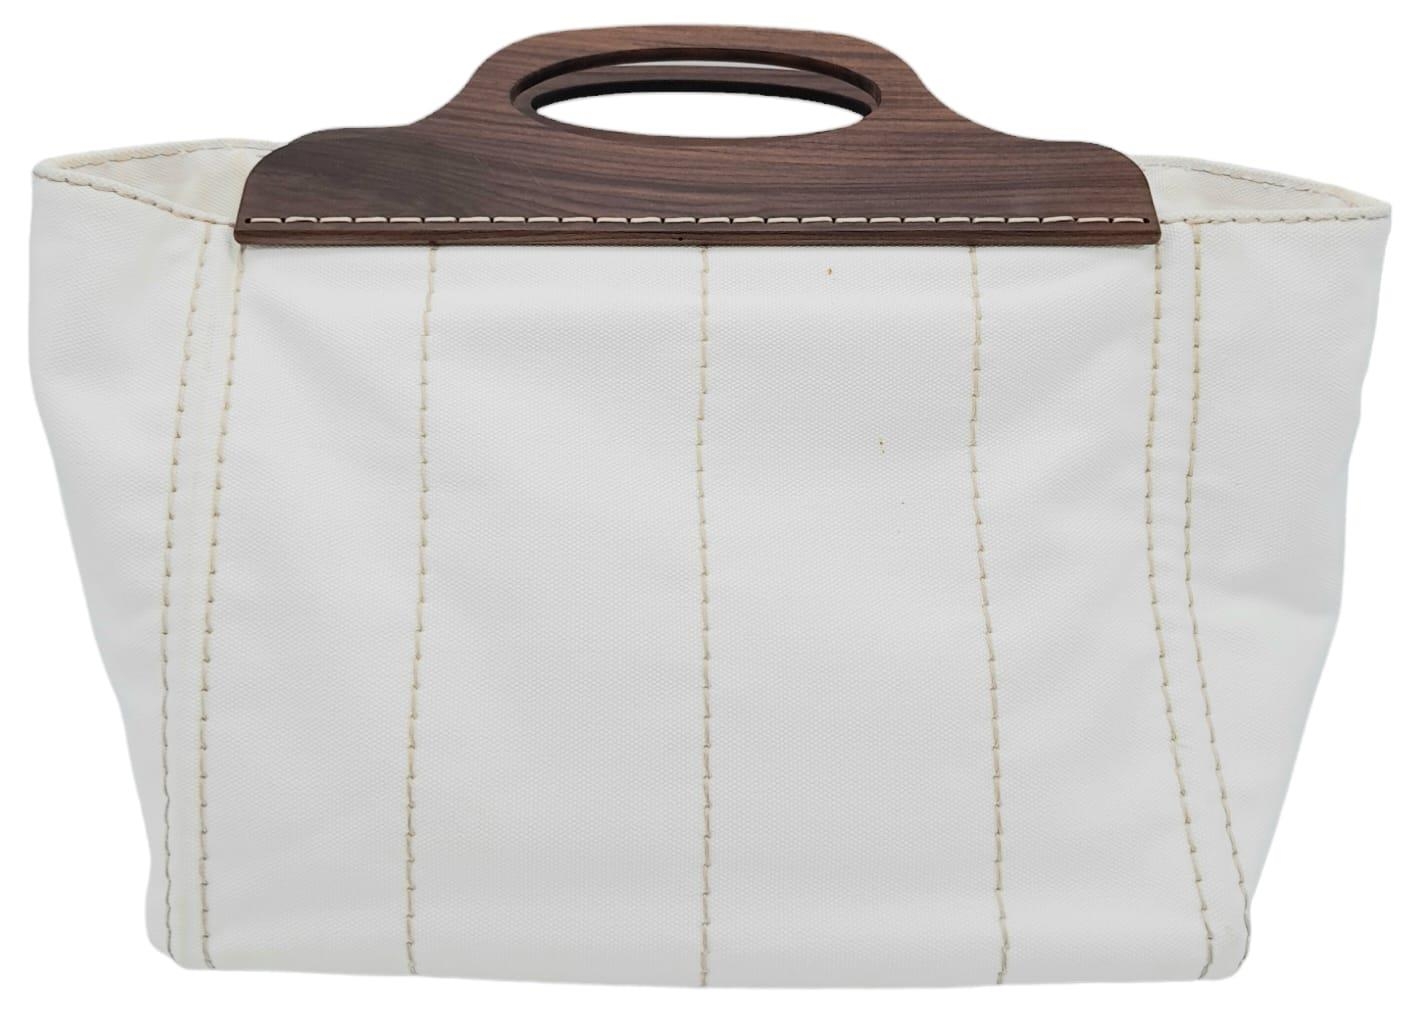 A Prada White Exteriors with Brown Wooden Handle Logo-printed Striped Tote Bag. Vertical - Image 4 of 9